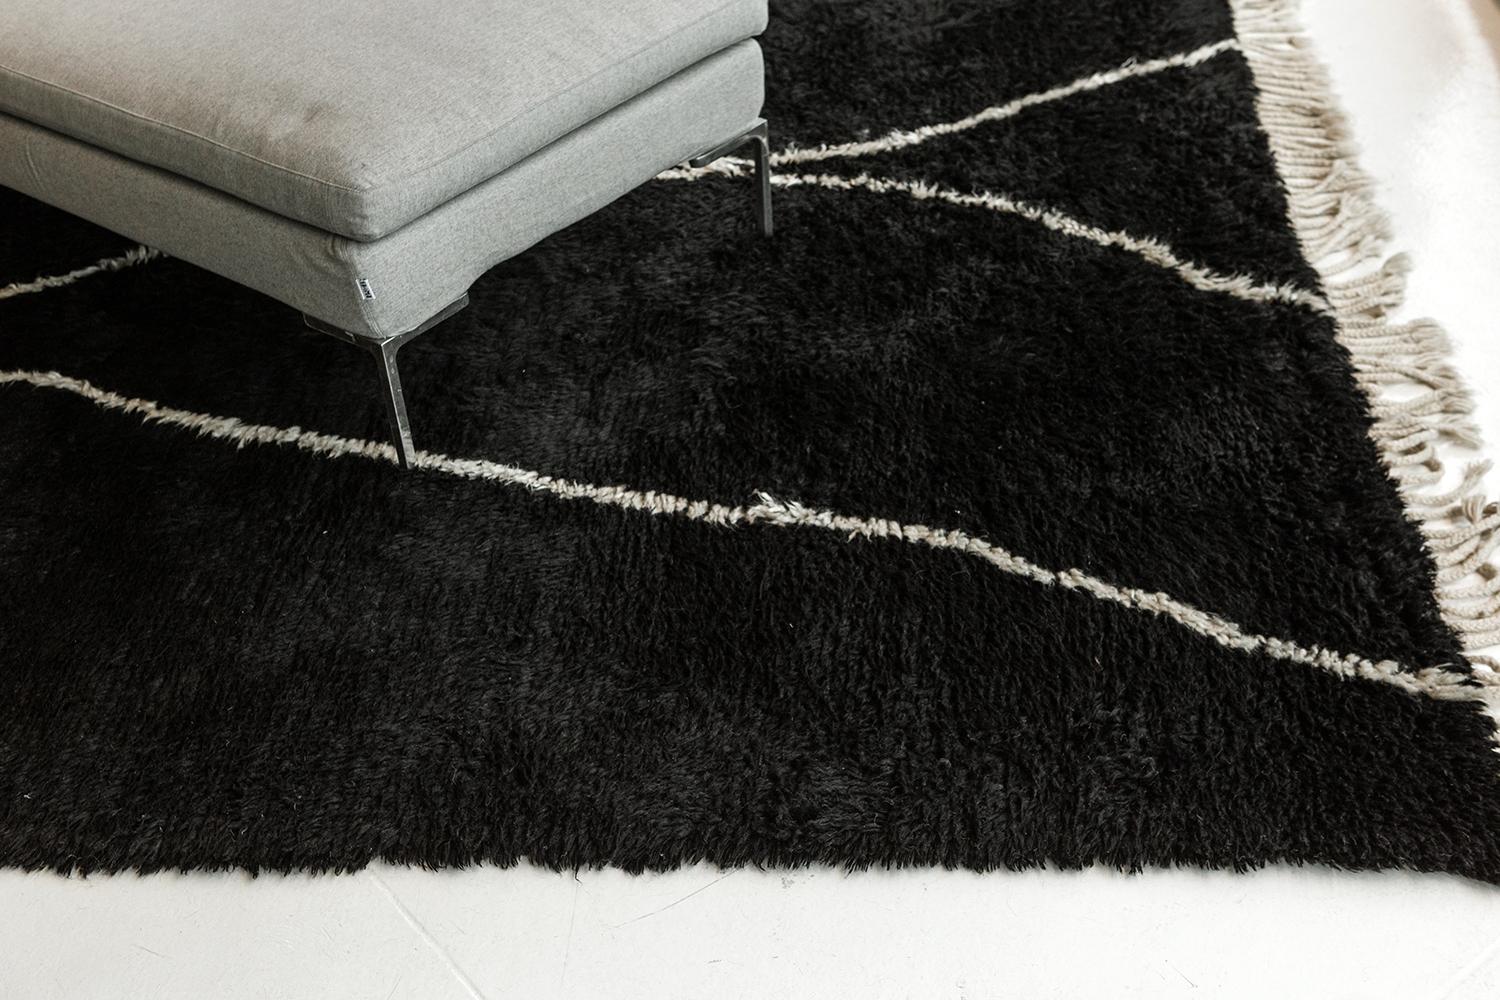 Featuring the soft linear accents running along the plush textured cream field that creates symbolic motifs from the ancient Berber culture. Beautiful tassels complements the overall appeal of this wonderful work of art. This noteworthy rug called